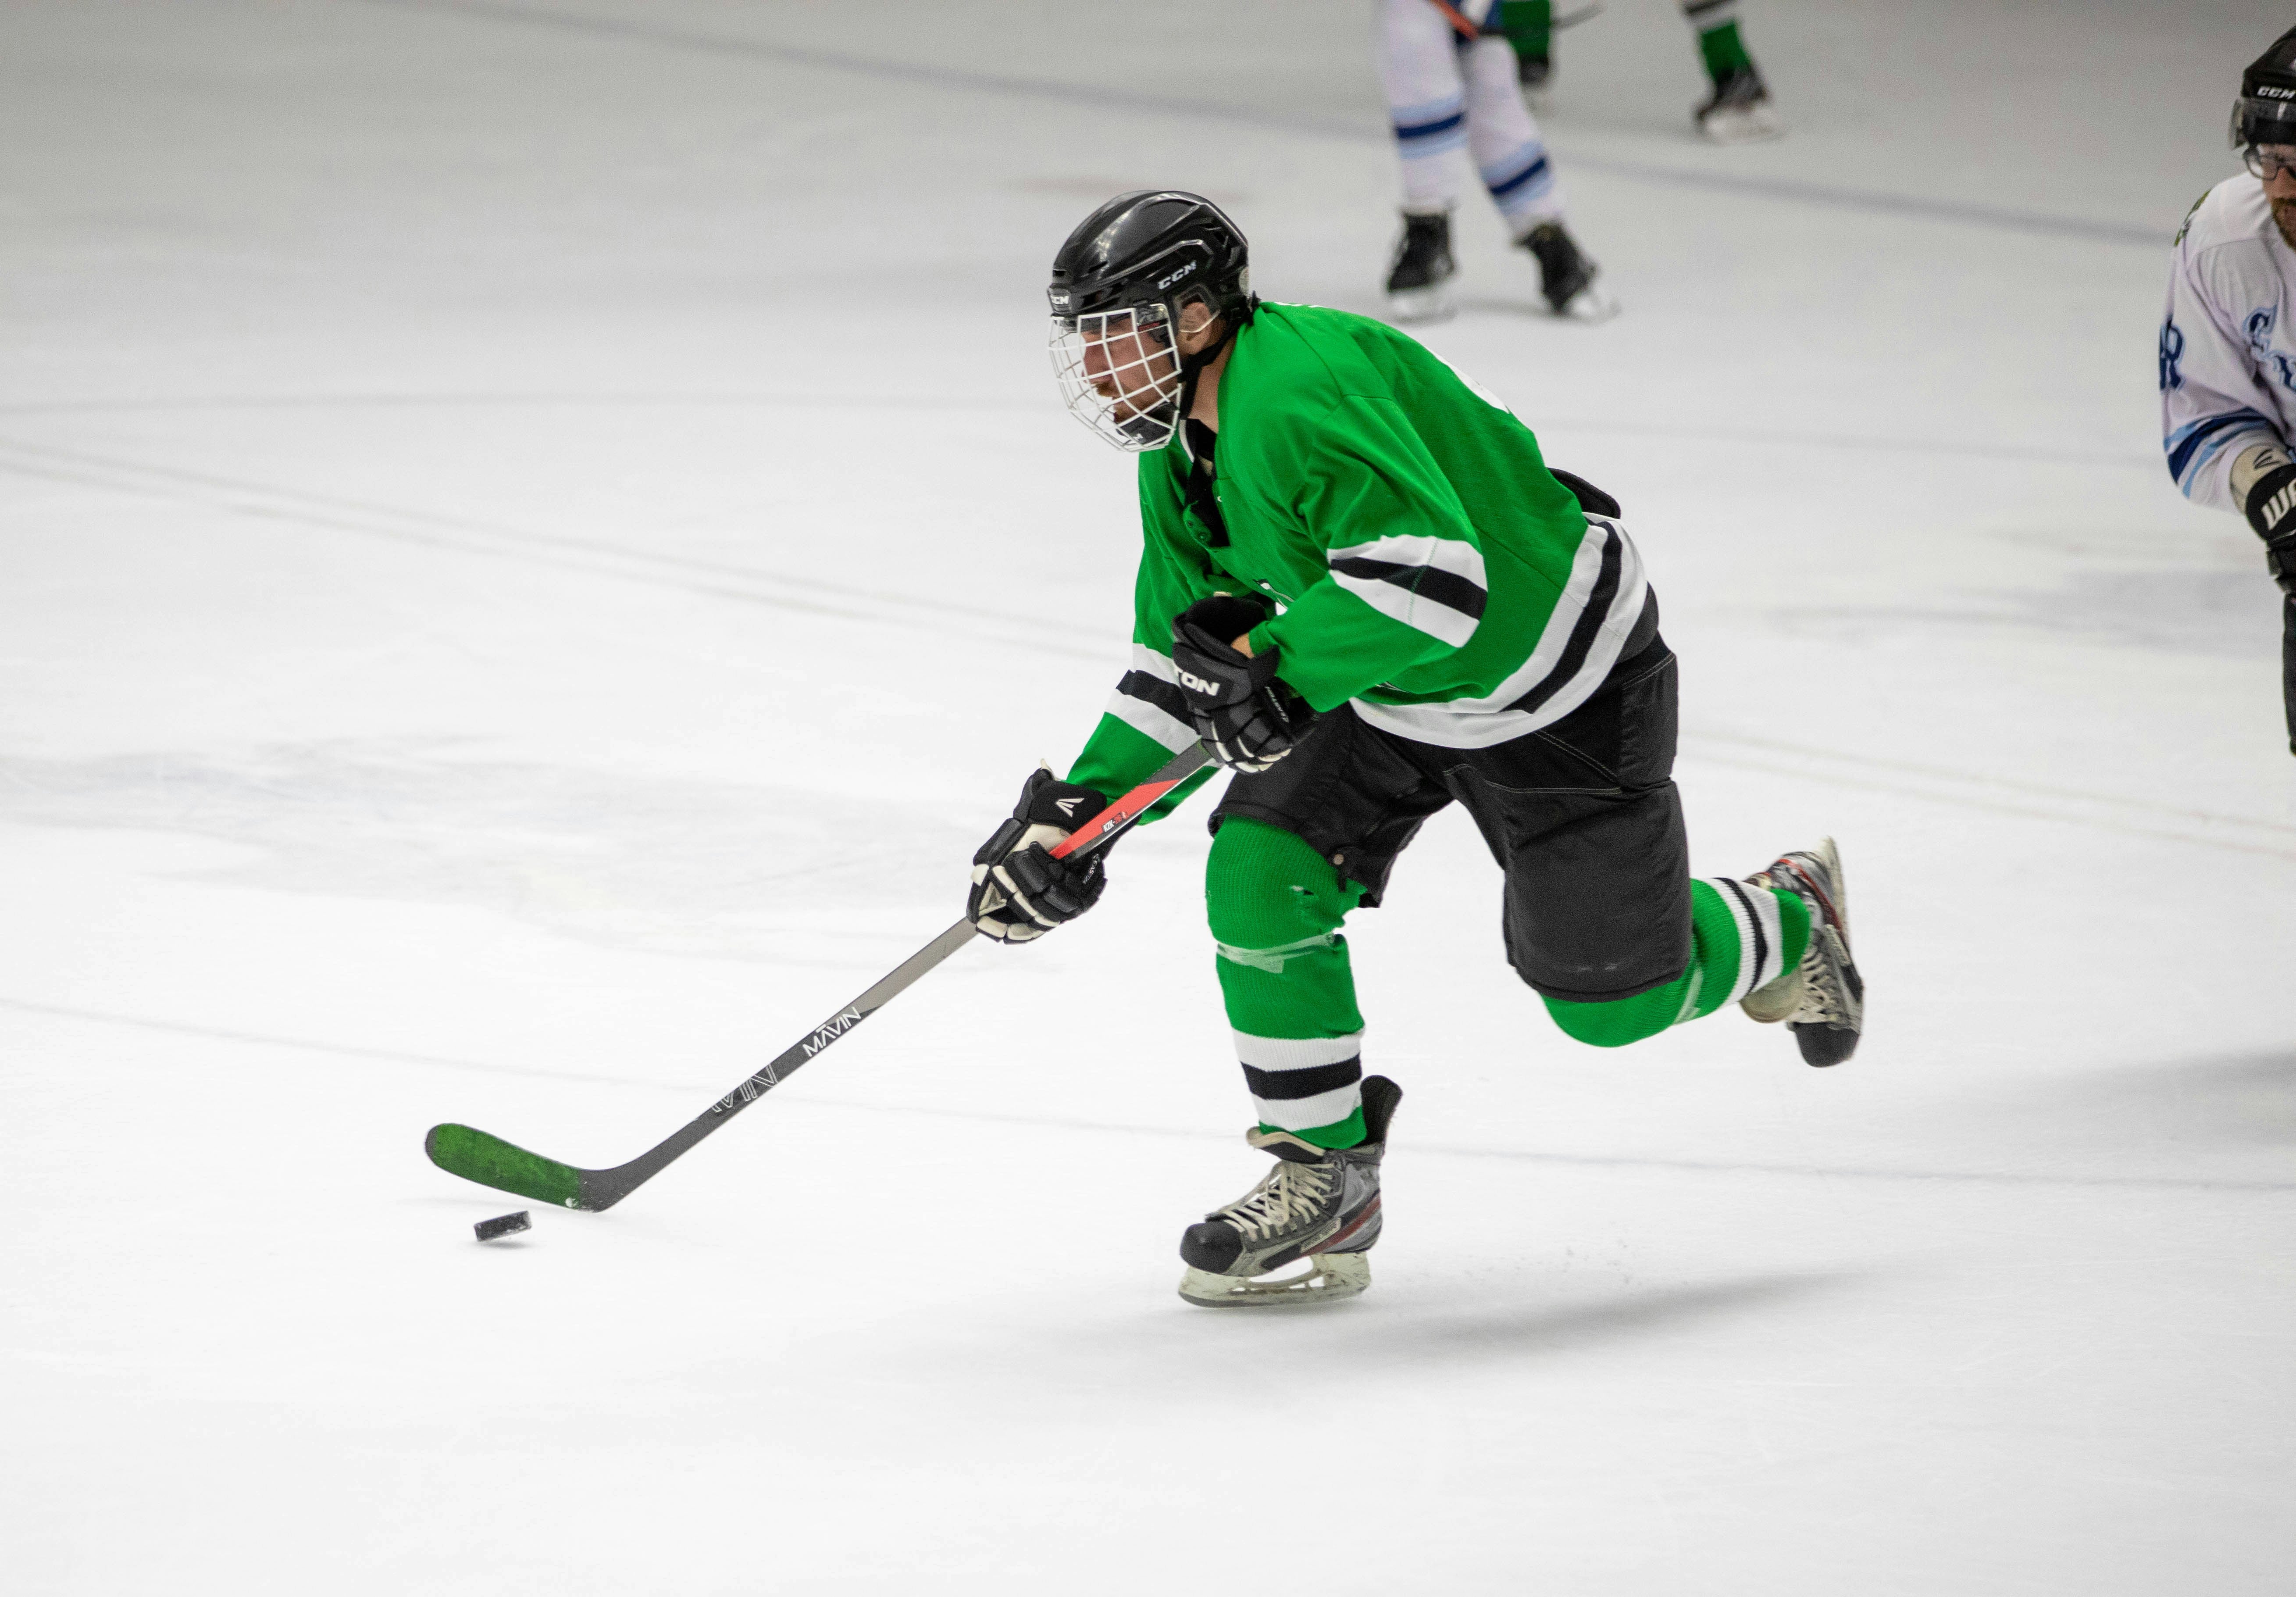 Ruling the Rink: How to Establish Aggressive Dominance on the Ice